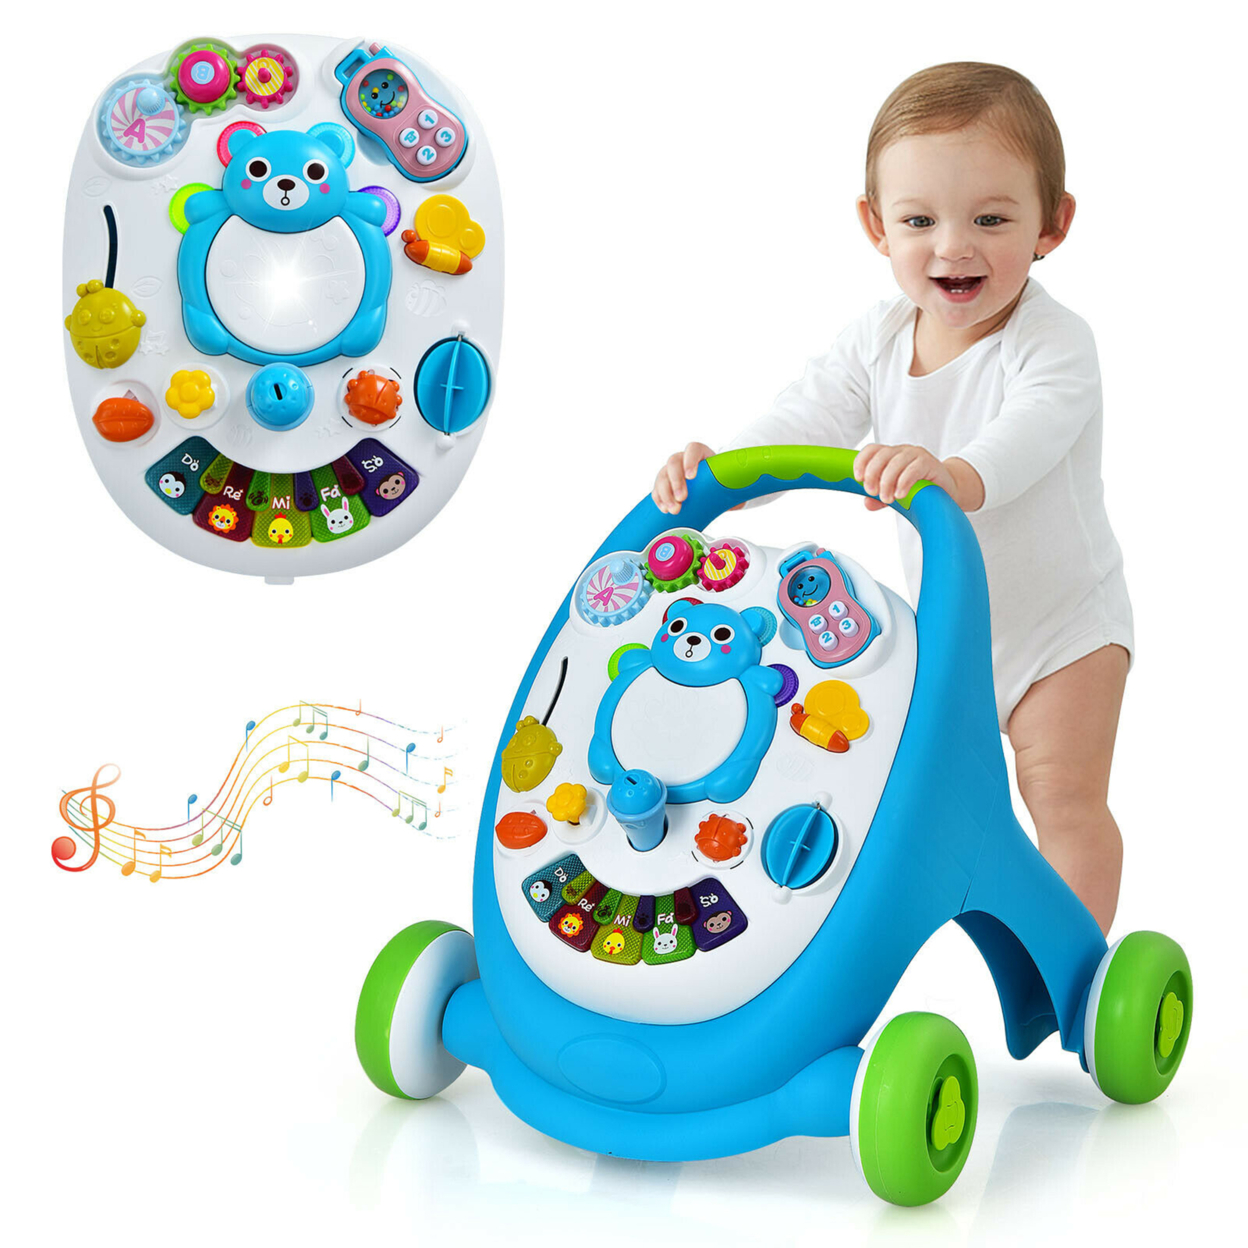 Sit-to-Stand Learning Walker Toddler Push Walking Toy W/Lights & Sounds - Blue